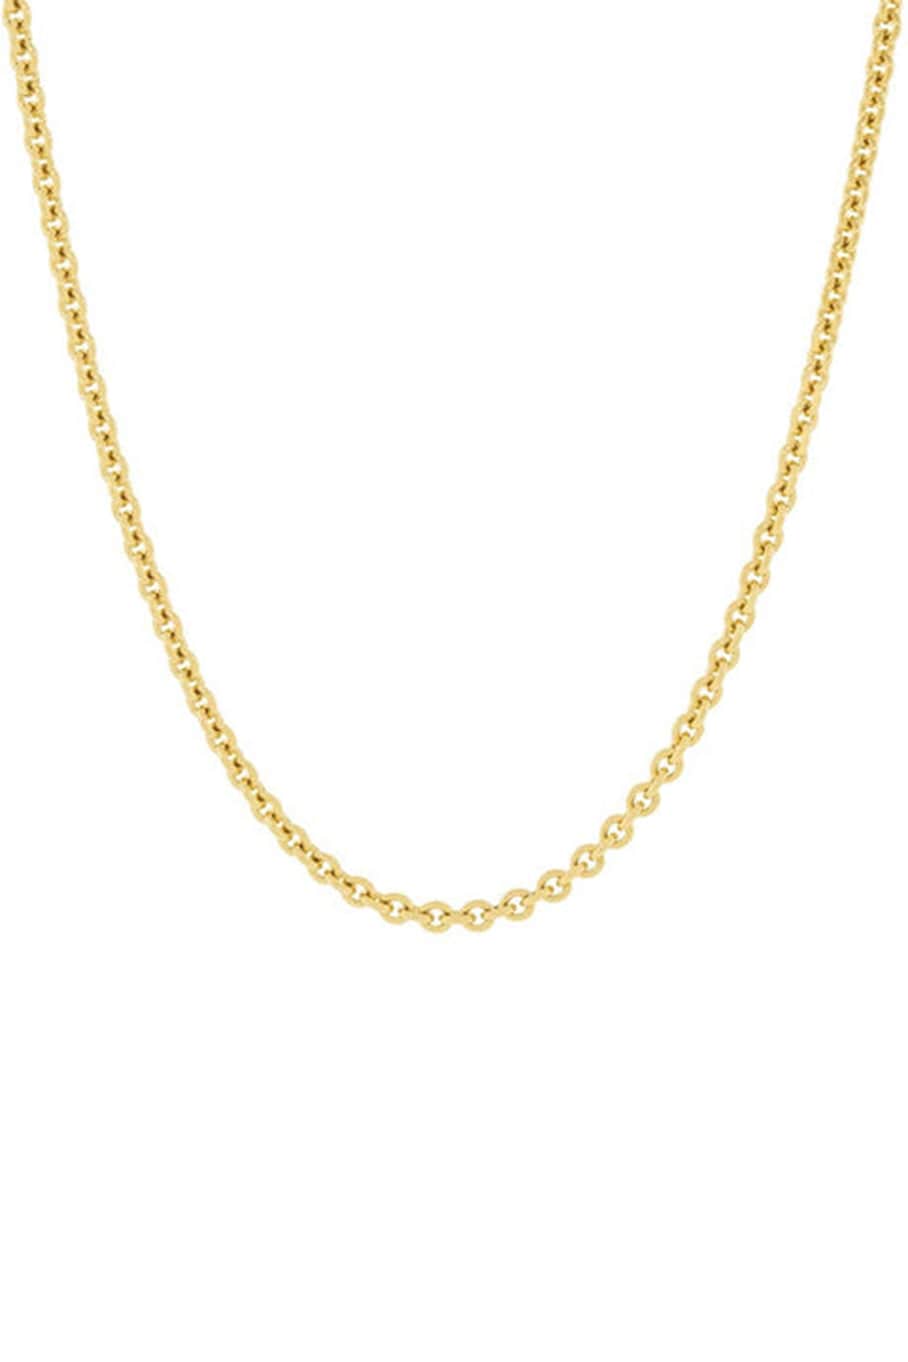 MARISSA DIAMONDS-36 Inch 3.0MM Yellow Gold Round Cable Chain-YELLOW GOLD